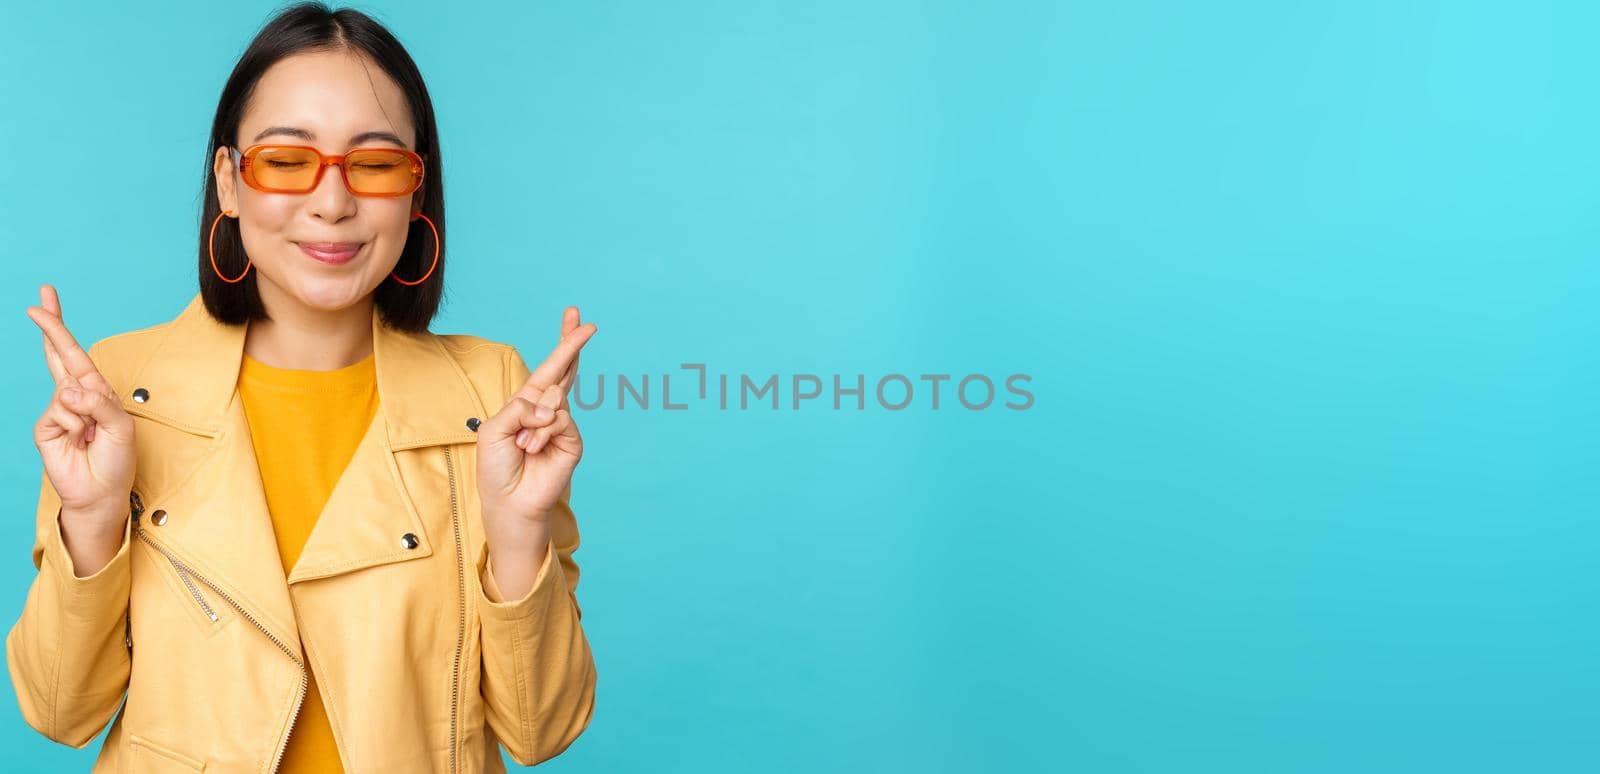 Smiling beautiful asian woman wishing, cross fingers for good luck and looking hopeful, standing over blue background. Copy space